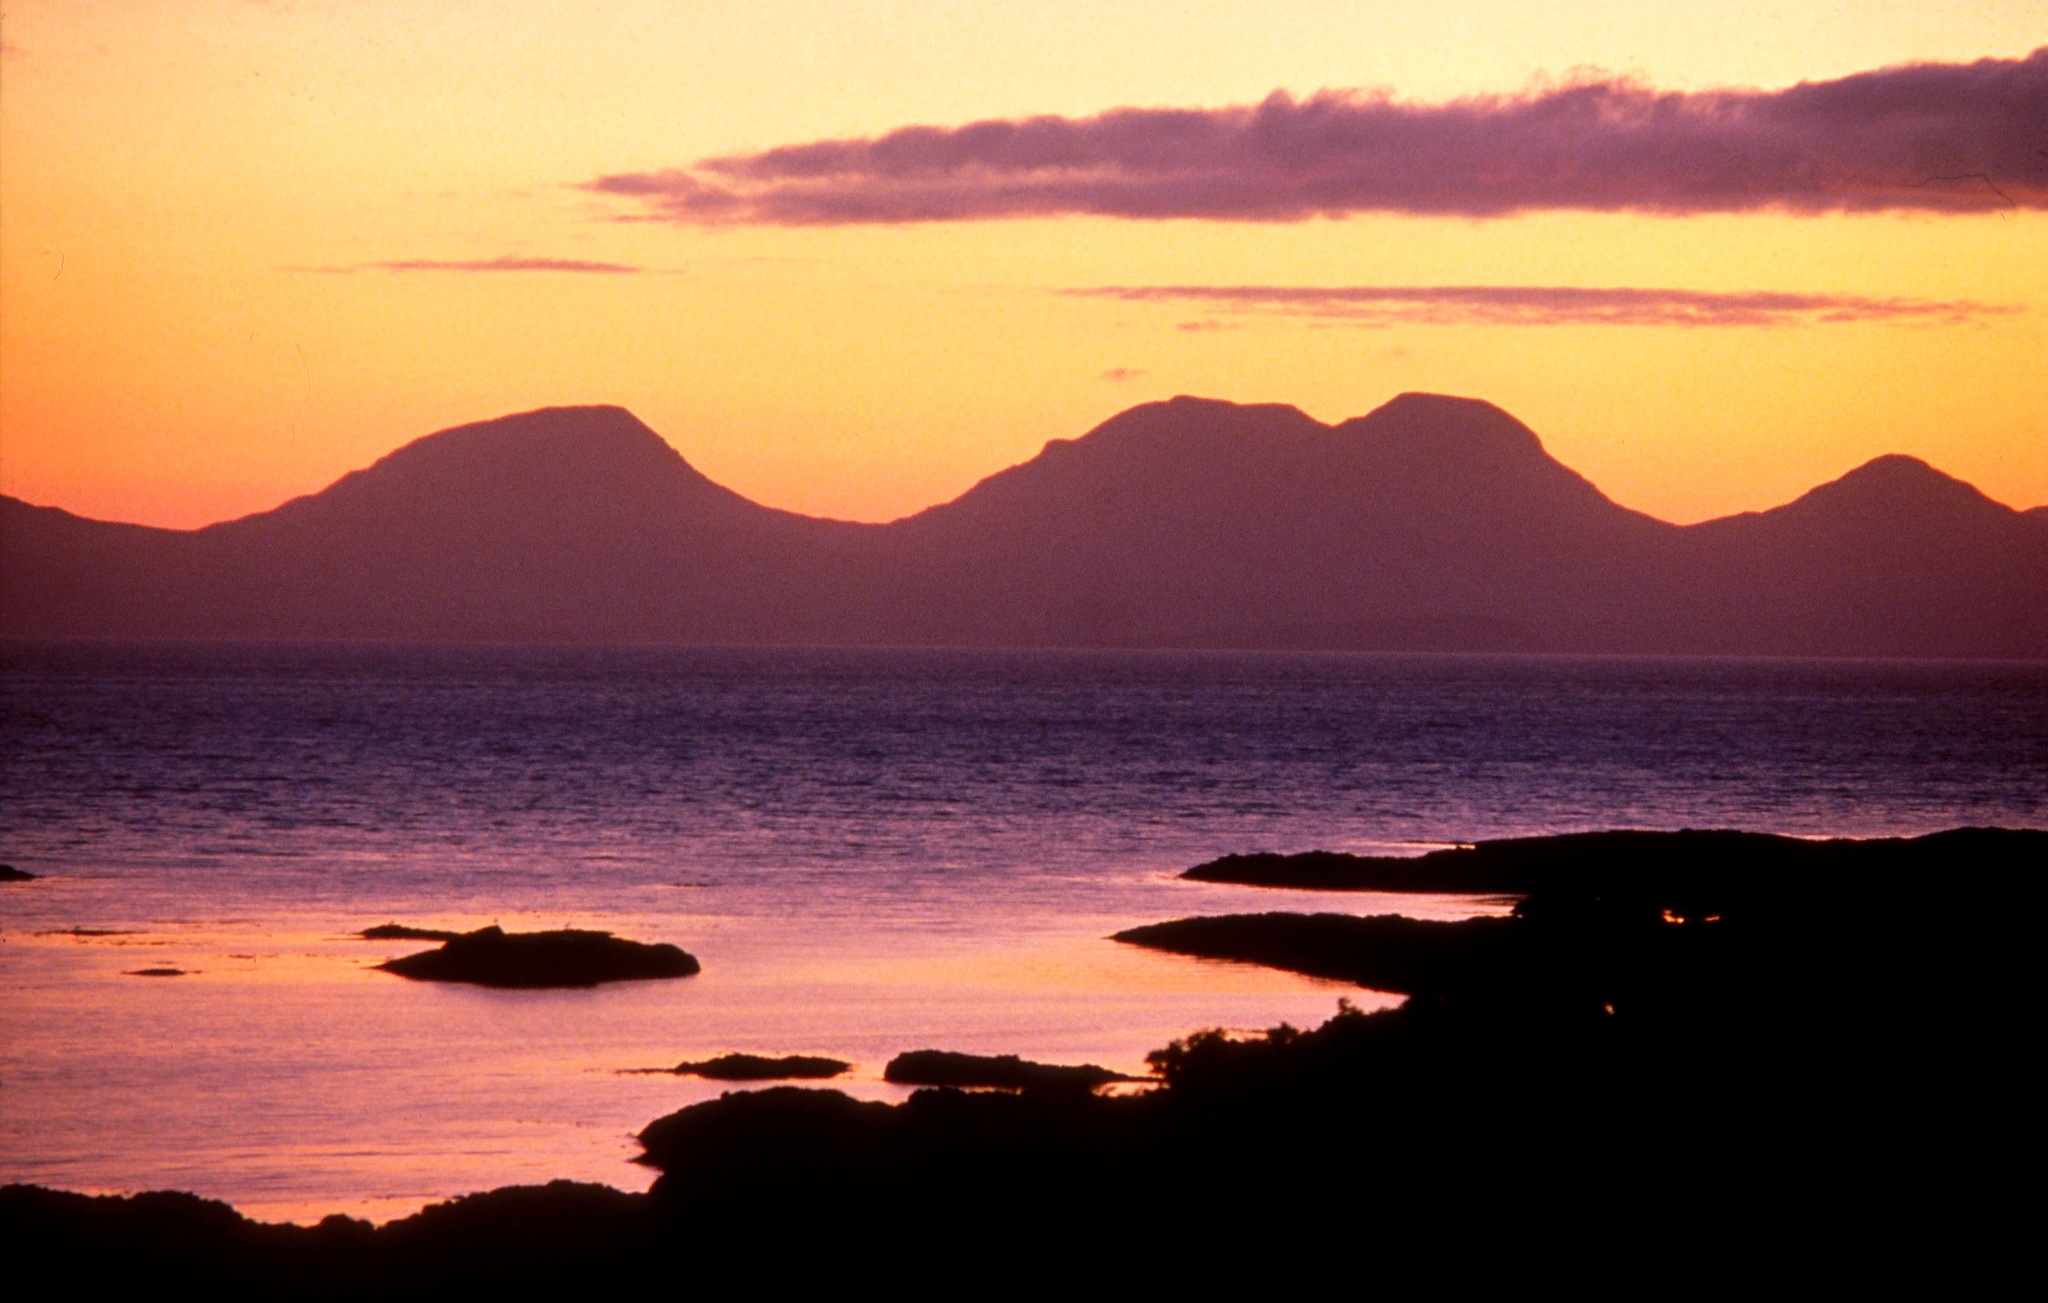 The Paps of Jura at sunset